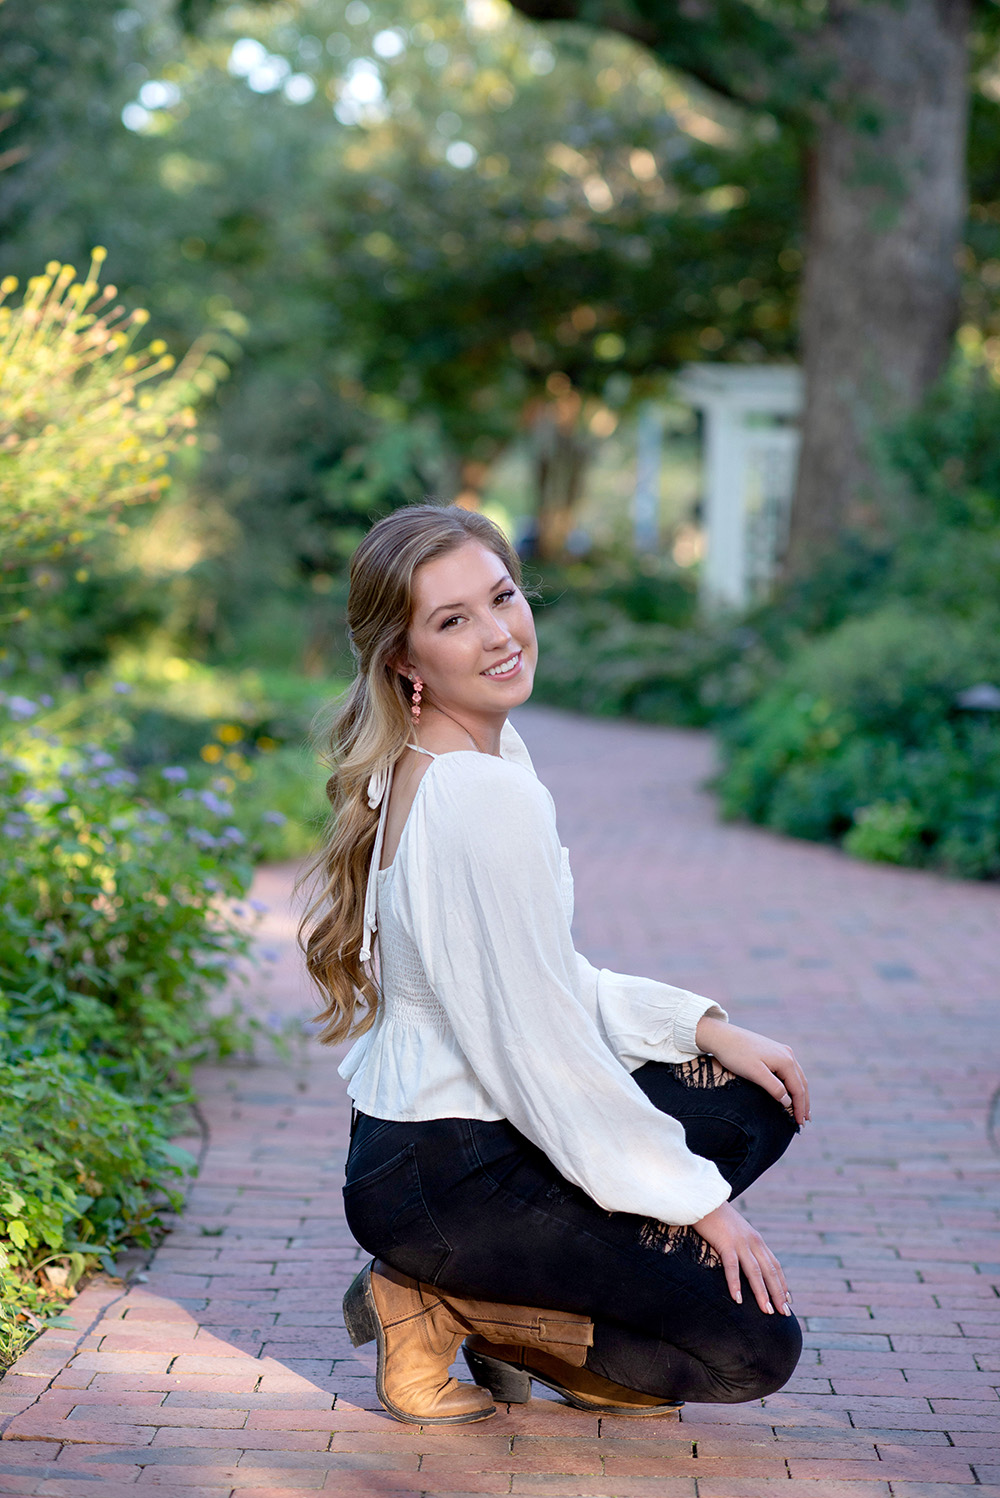 Cari Long Photography specializes in Senior Portraits in the Raleigh , Cary , durham area of North Carolina